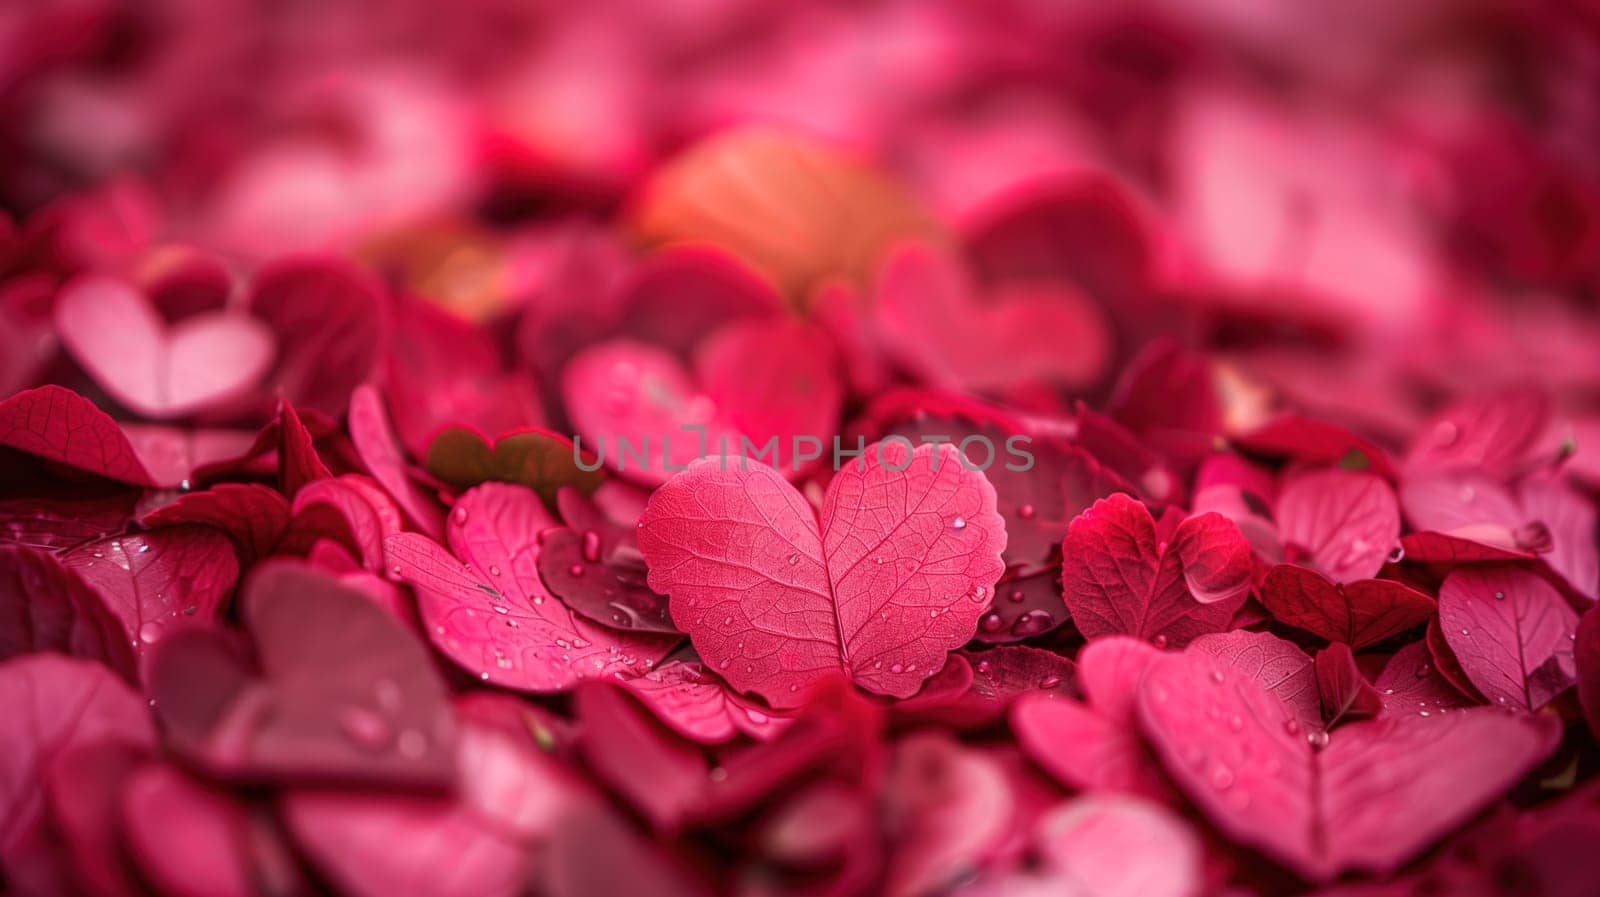 A close-up of rich, red petals captures the essence of celebration and affection during an International Mothers Day concert event. Spread across a surface, the petals create a sea of color emblematic of love and gratitude.